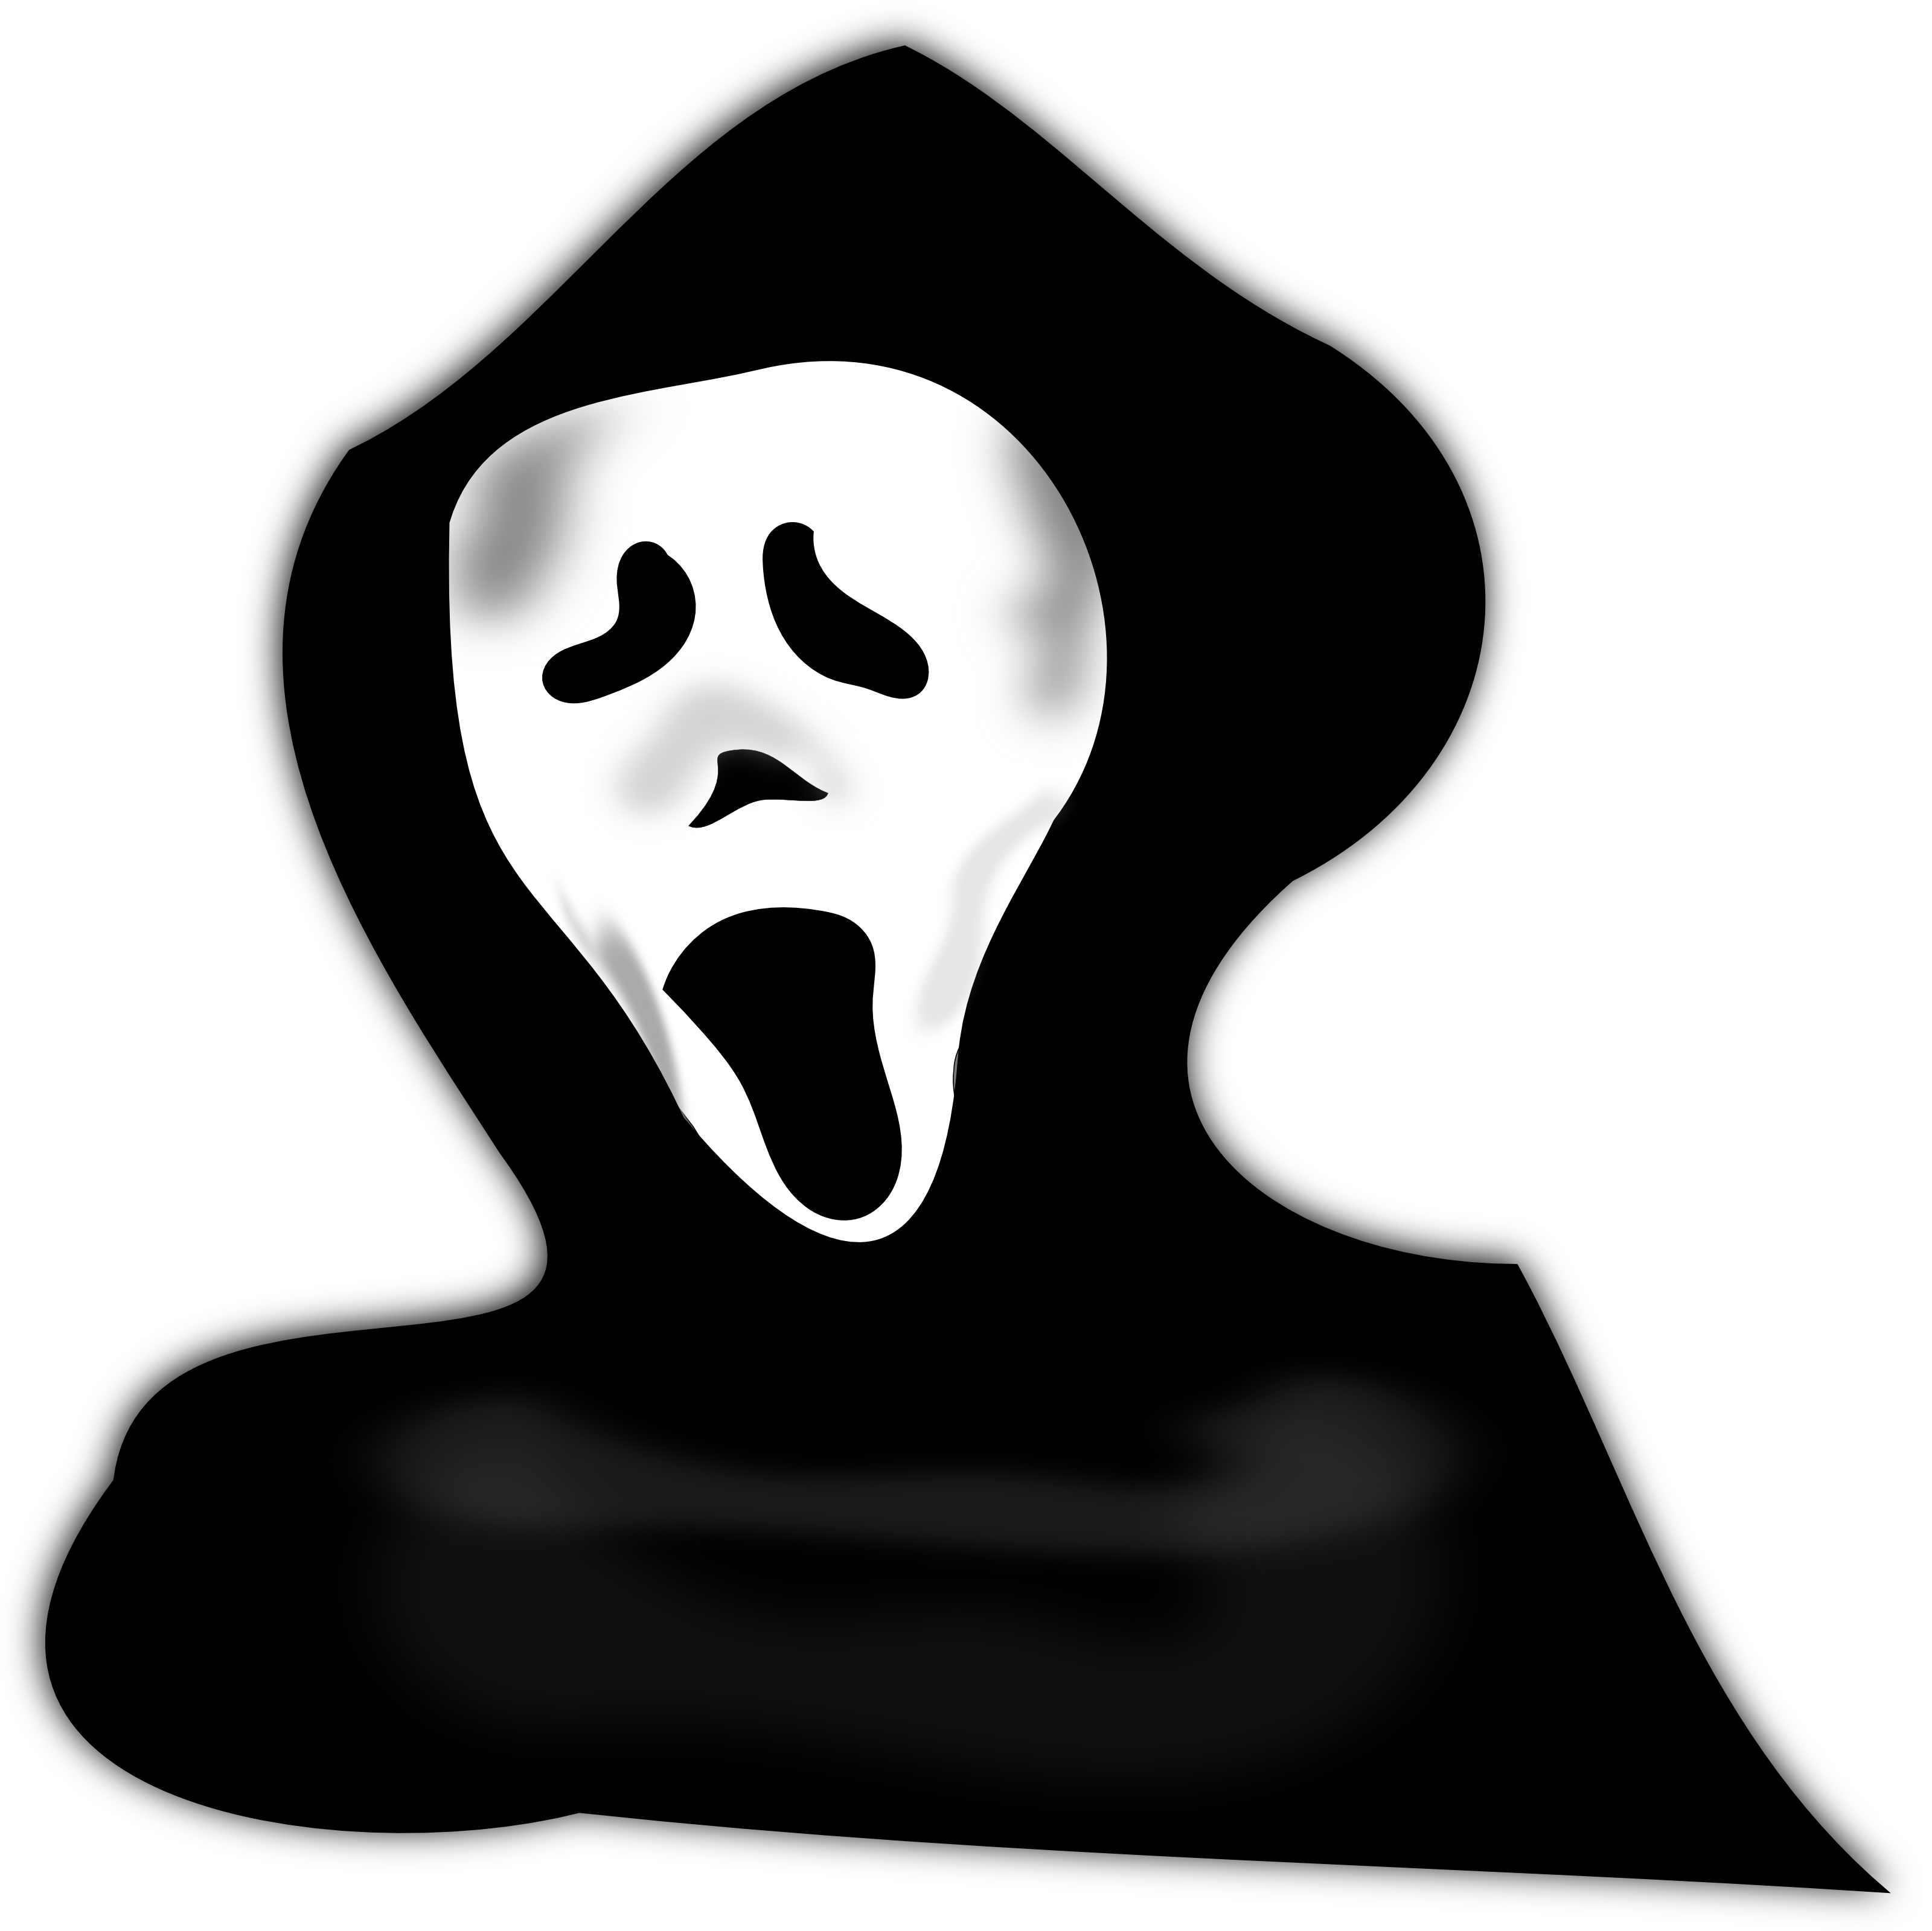 Download PNG image - Halloween Ghost PNG Photos 